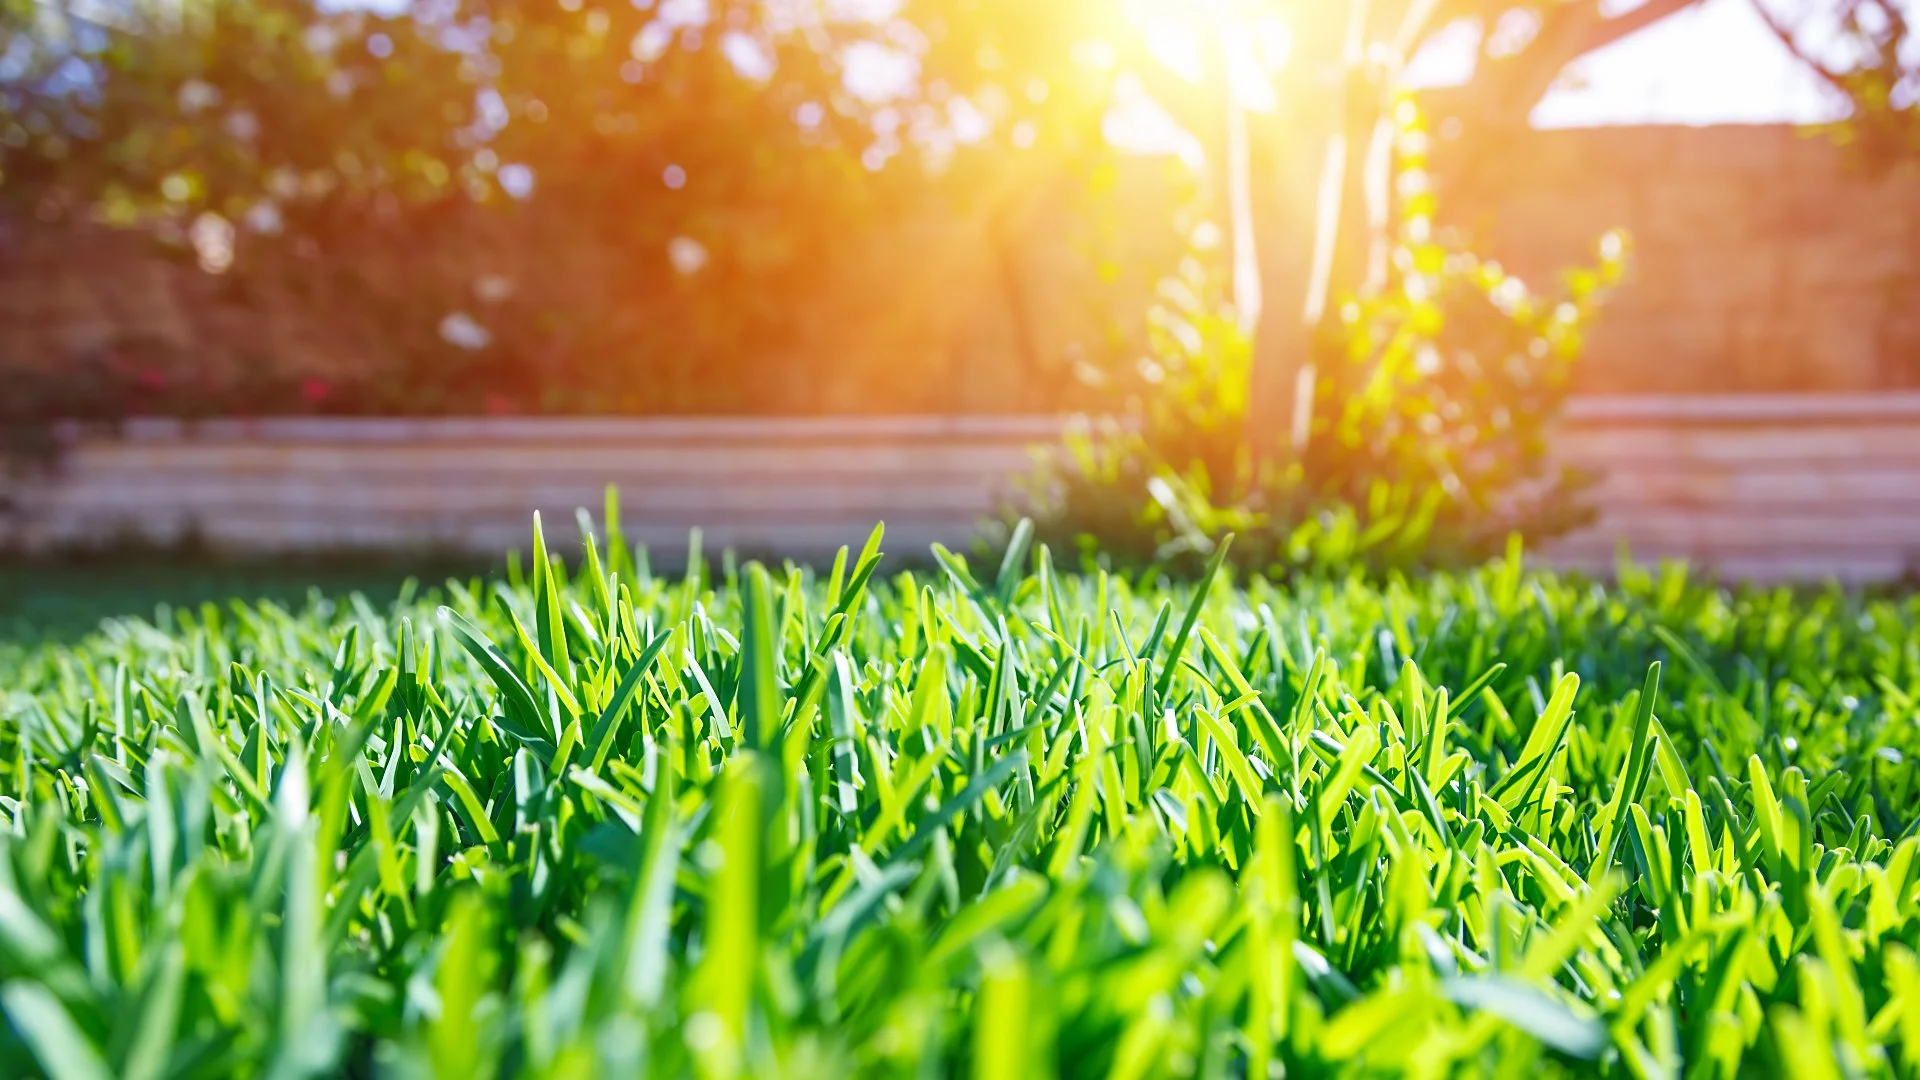 Fall Is Coming - What Should Your Lawn Care Look Like Through the End of the Year?